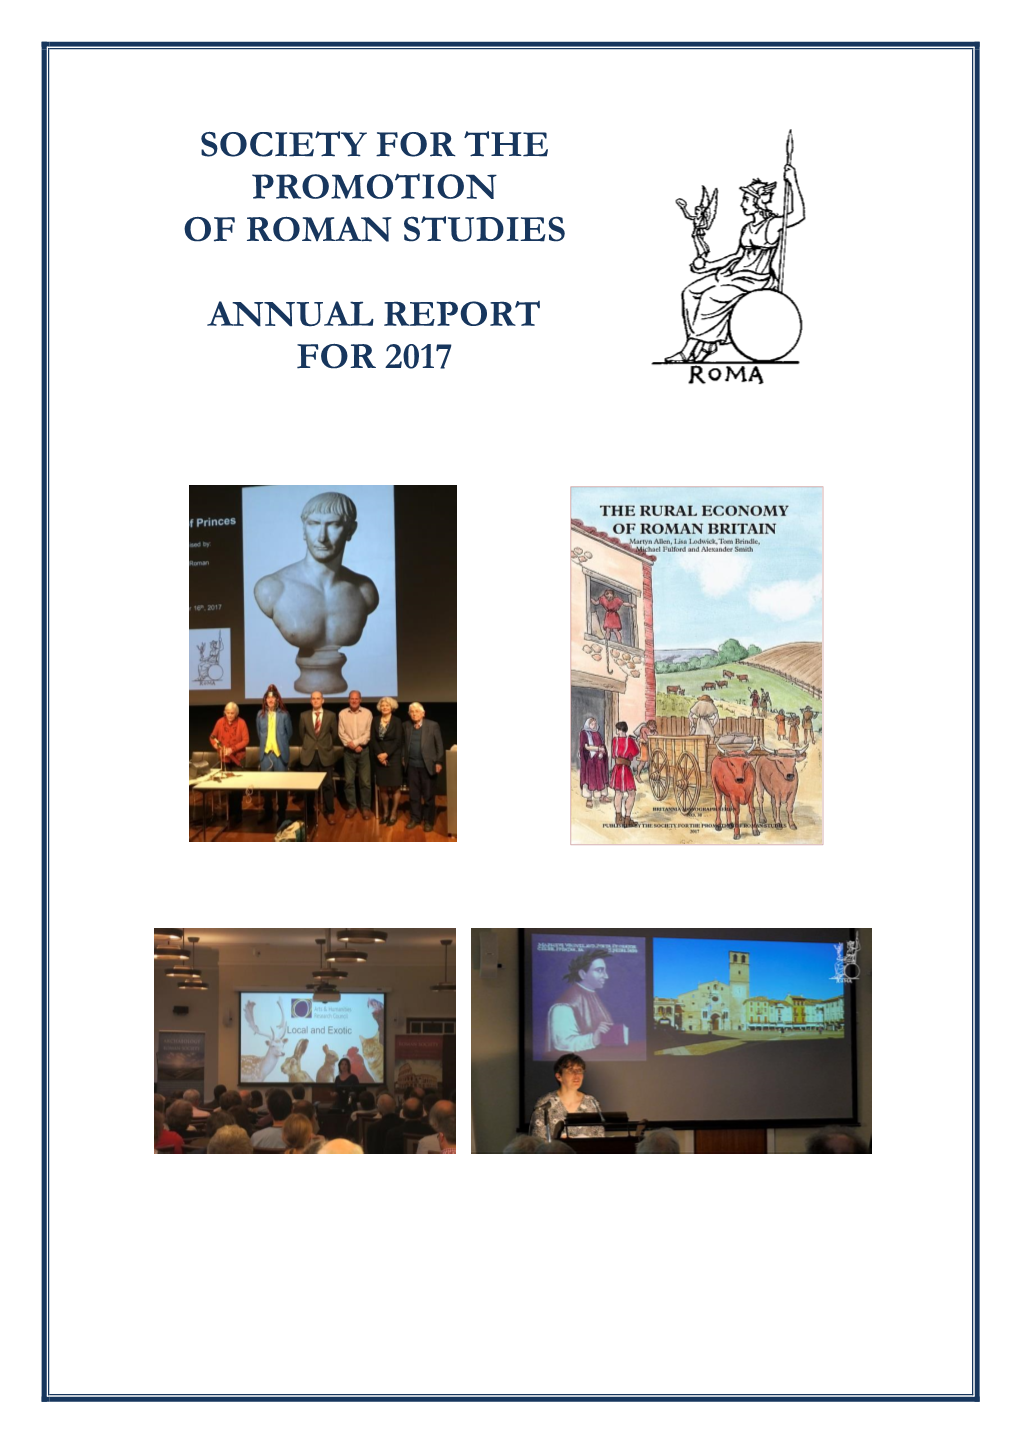 Society for the Promotion of Roman Studies Annual